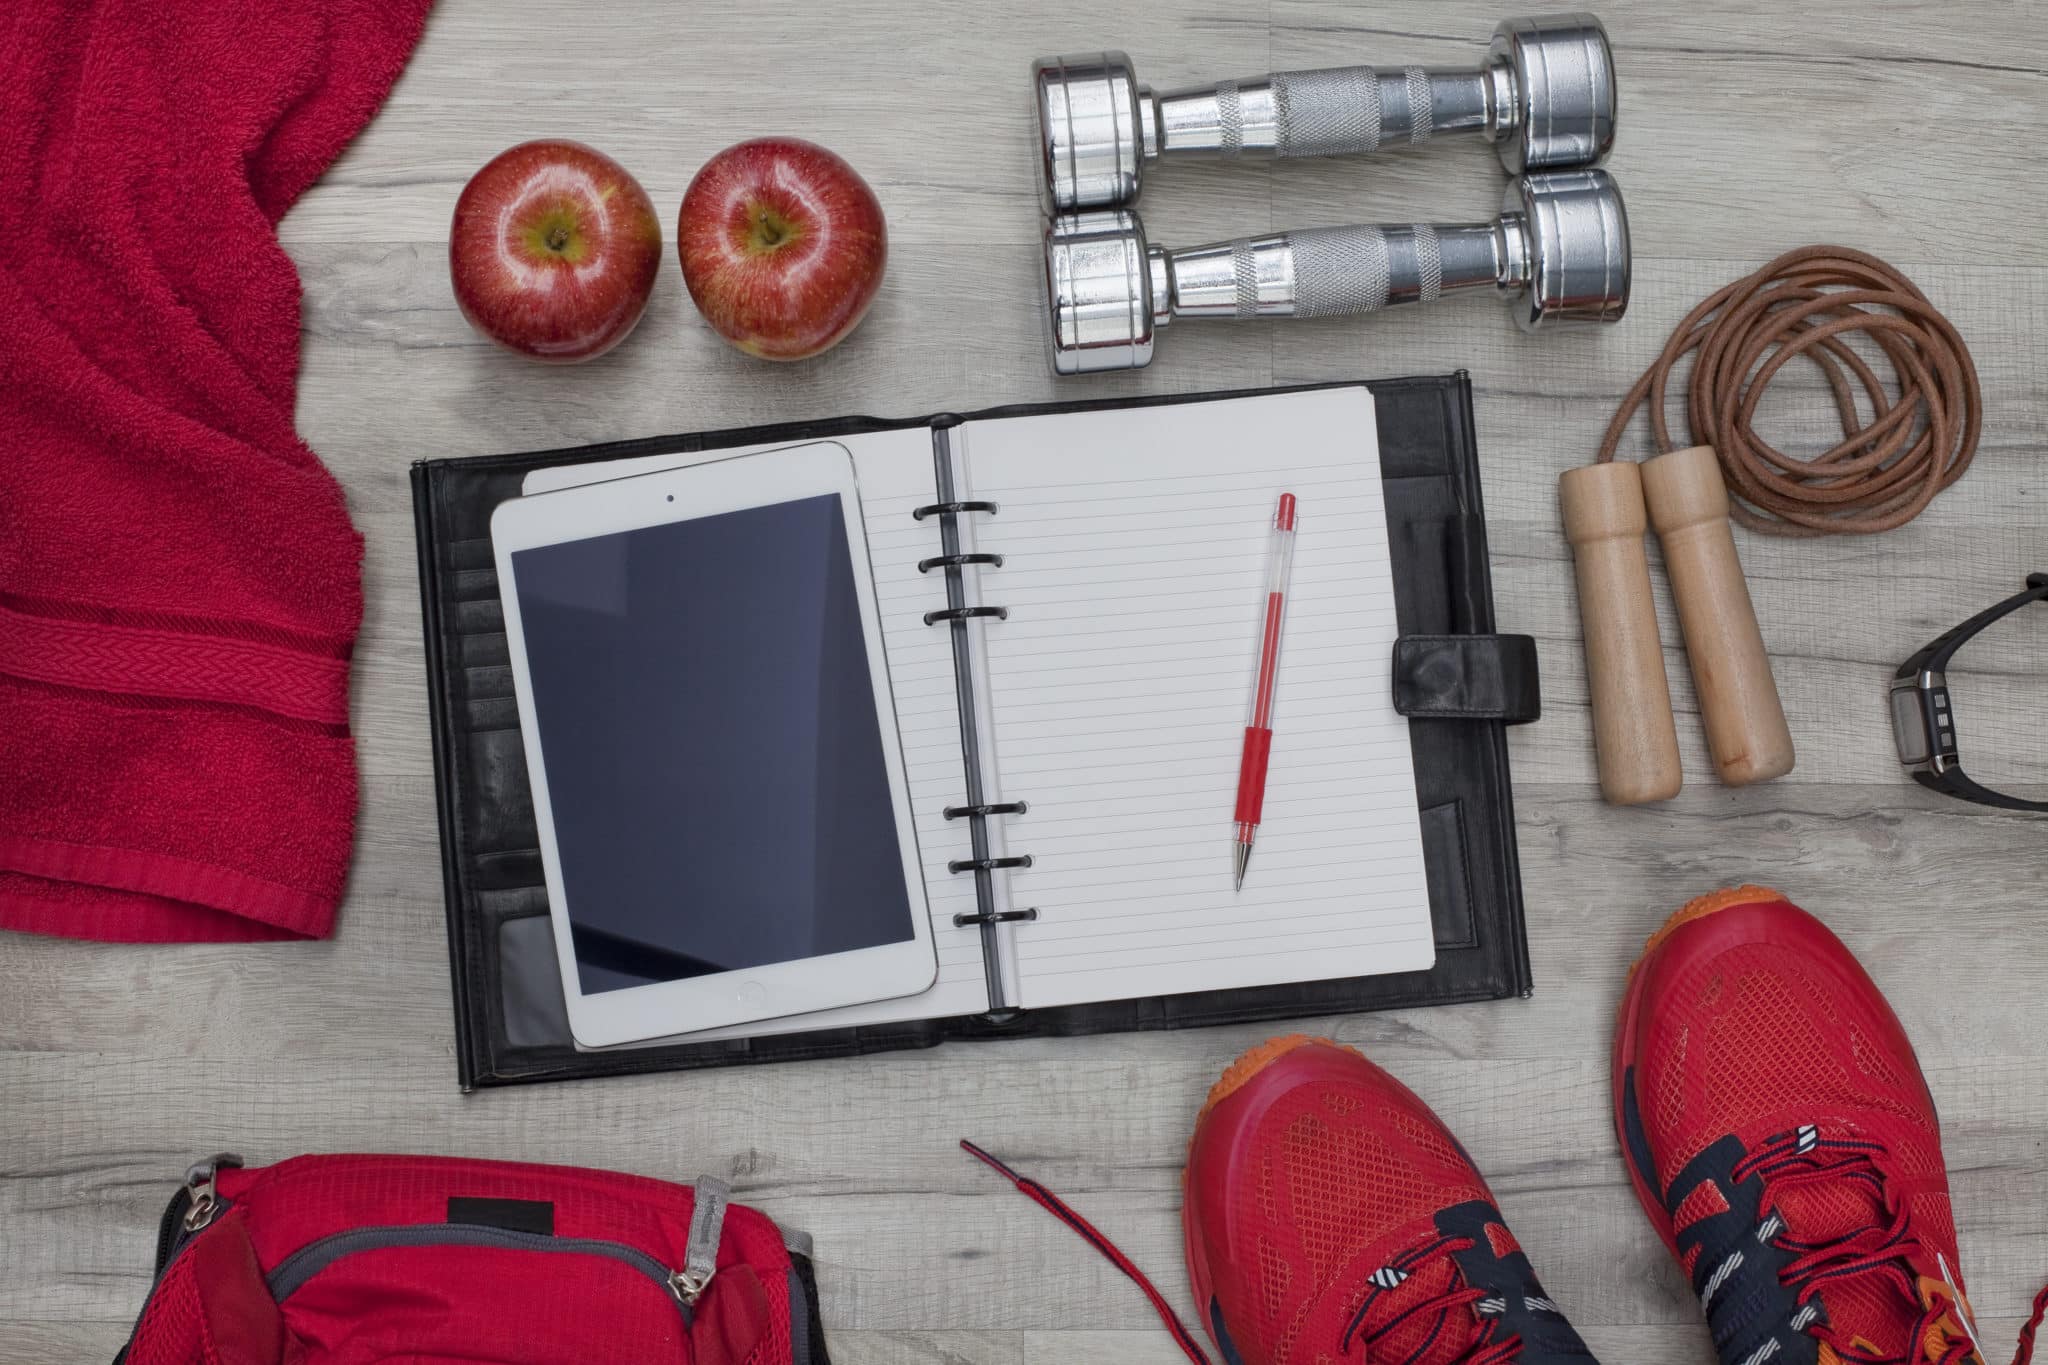 A notebook and ipad set up with dumbbells, apples, and tennis shoes